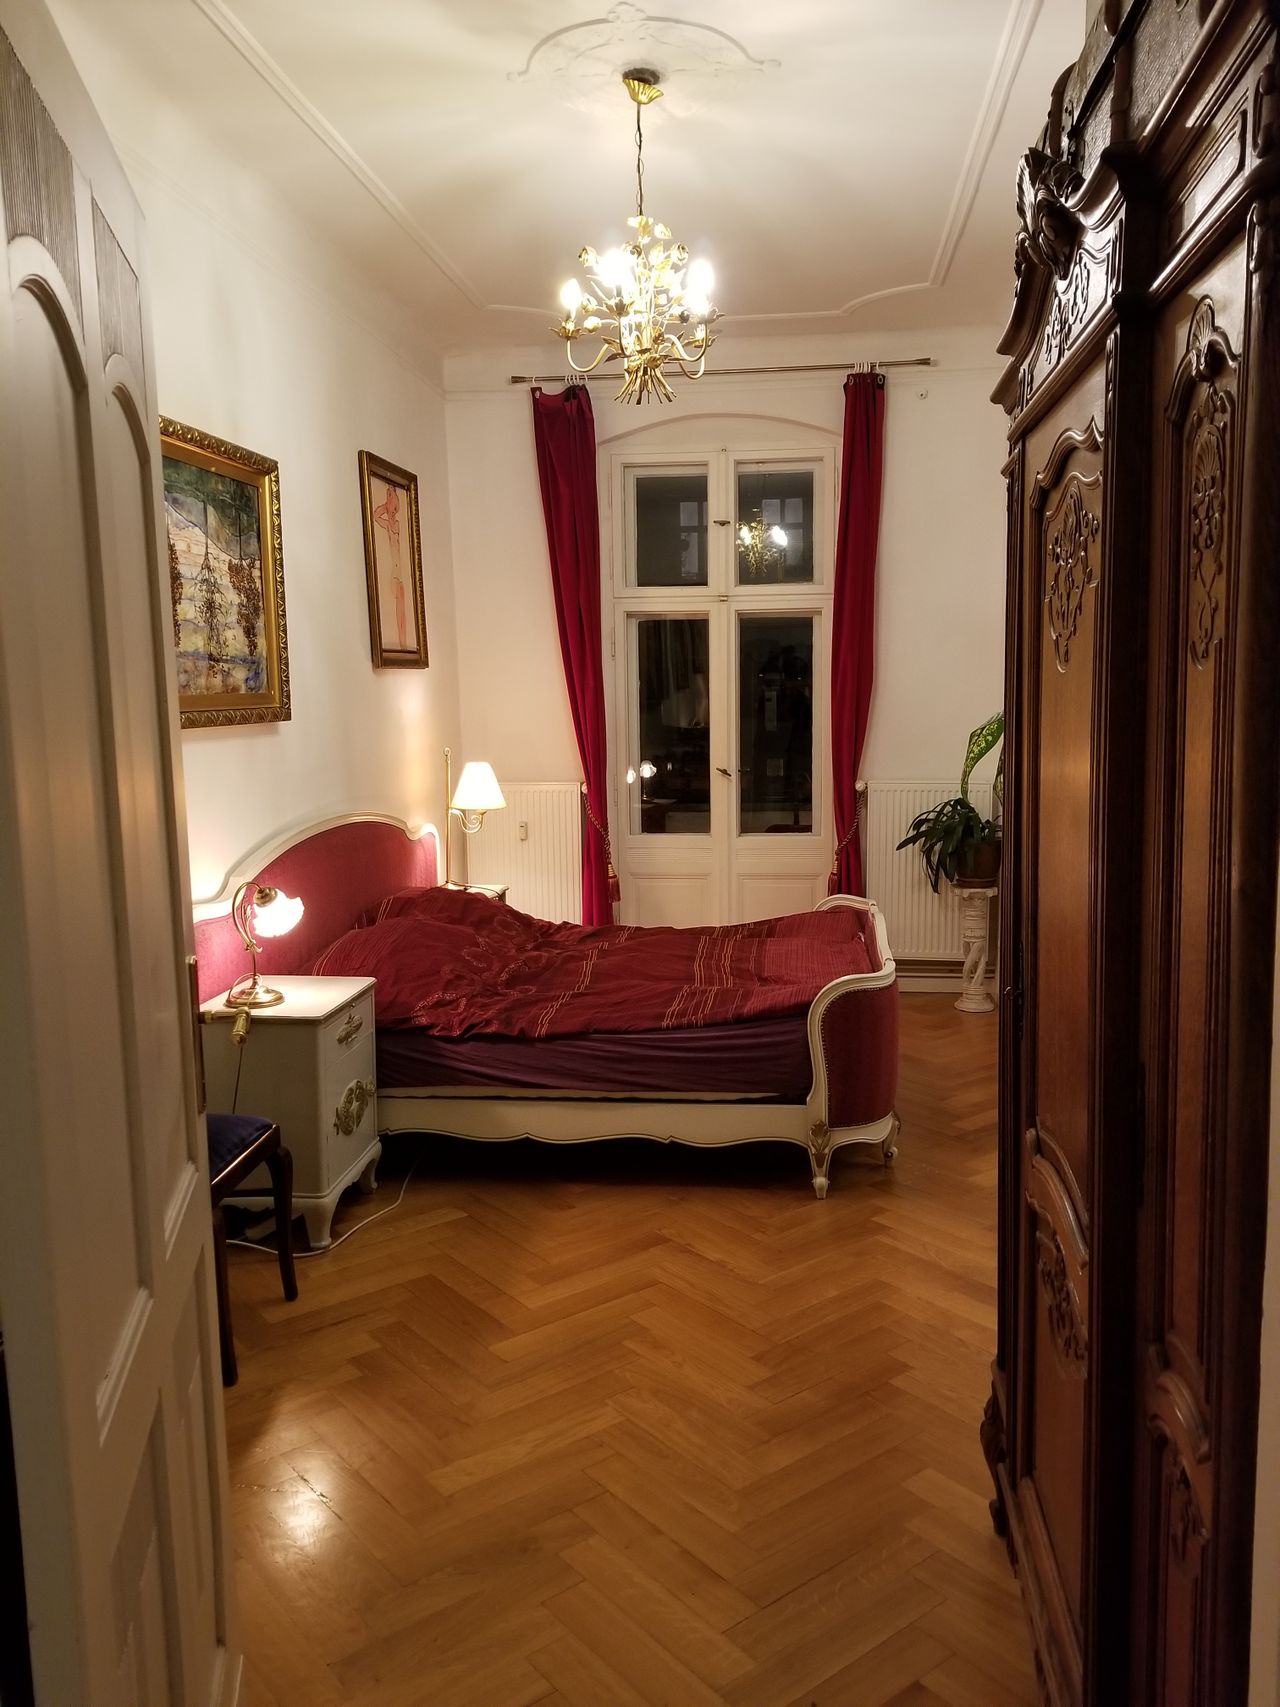 Kreuzberg: View on Parc 3 bedroom family, friends or students flat in central Berlin